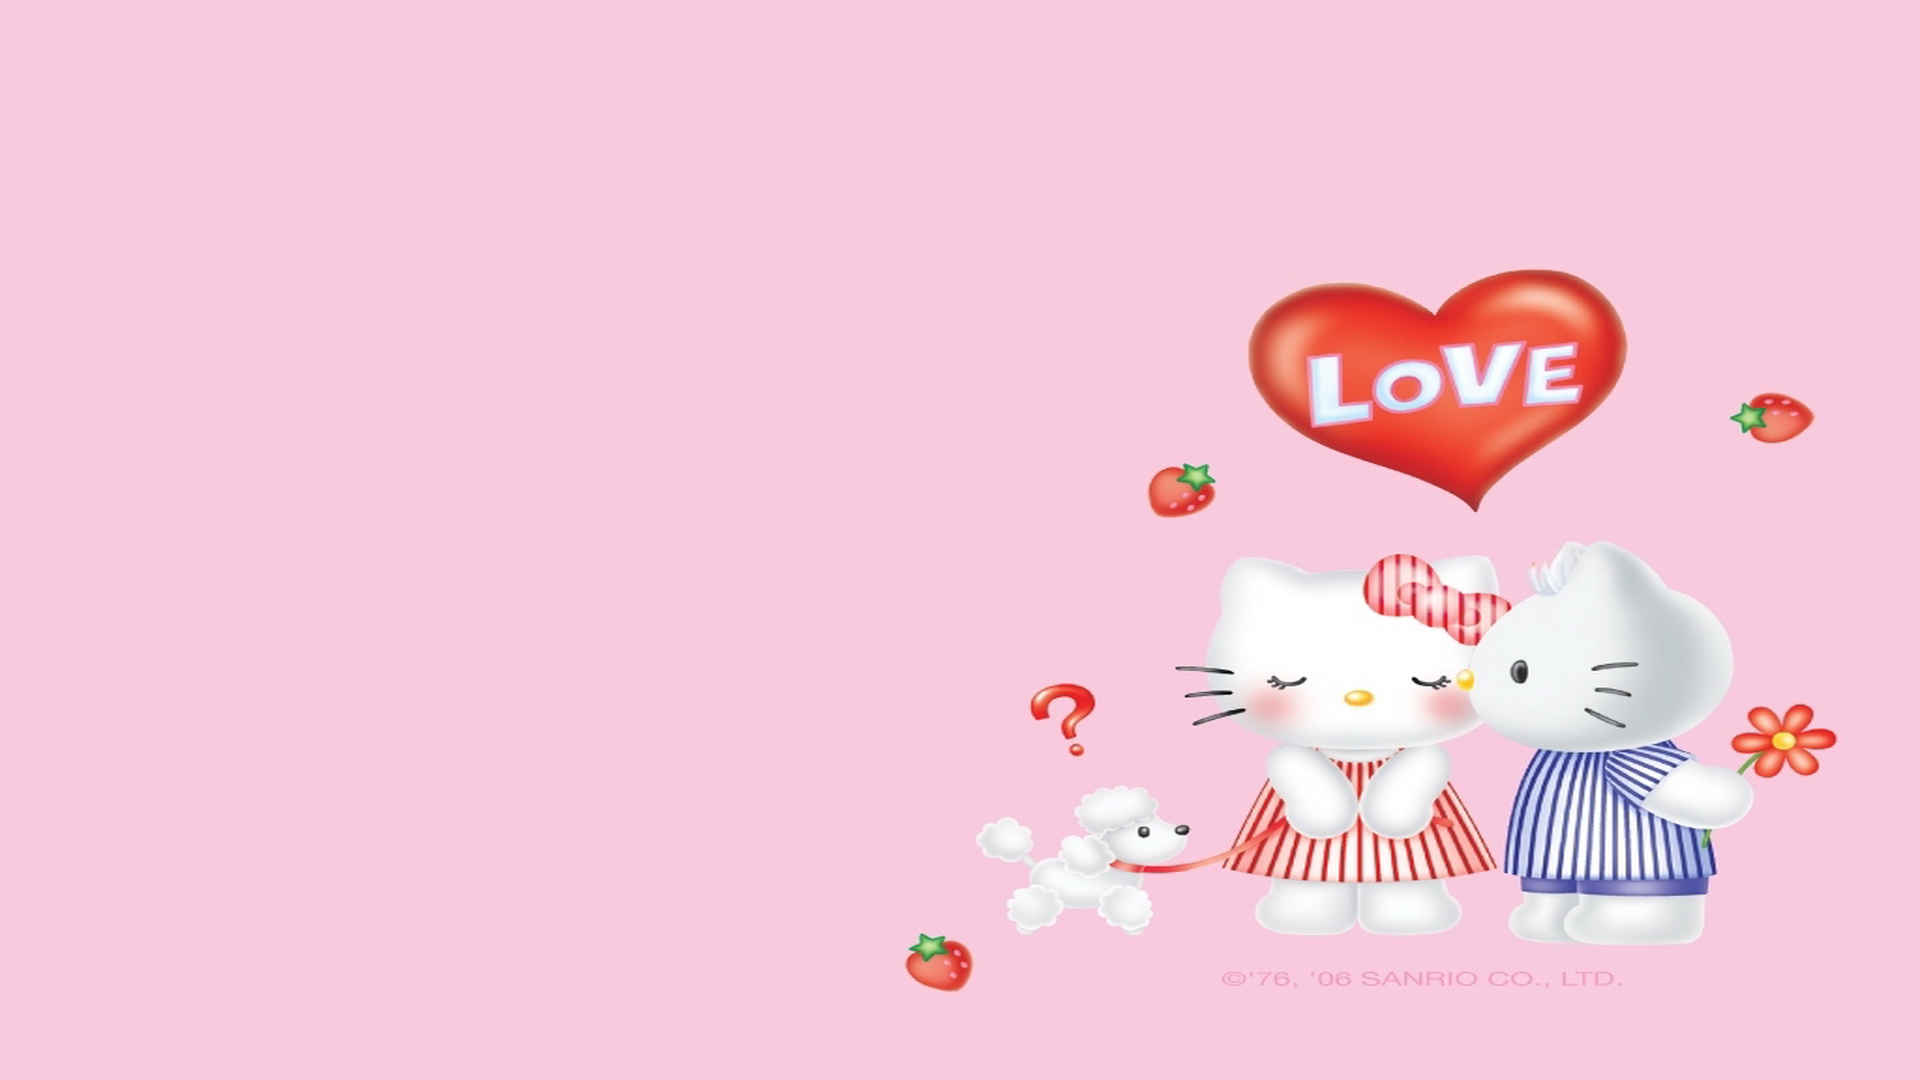 Free download wallpaper hello kitty love x for your desktop mobile tablet explore wallpaper hello kitty love hello kitty backgrounds background hello kitty hello kitty background